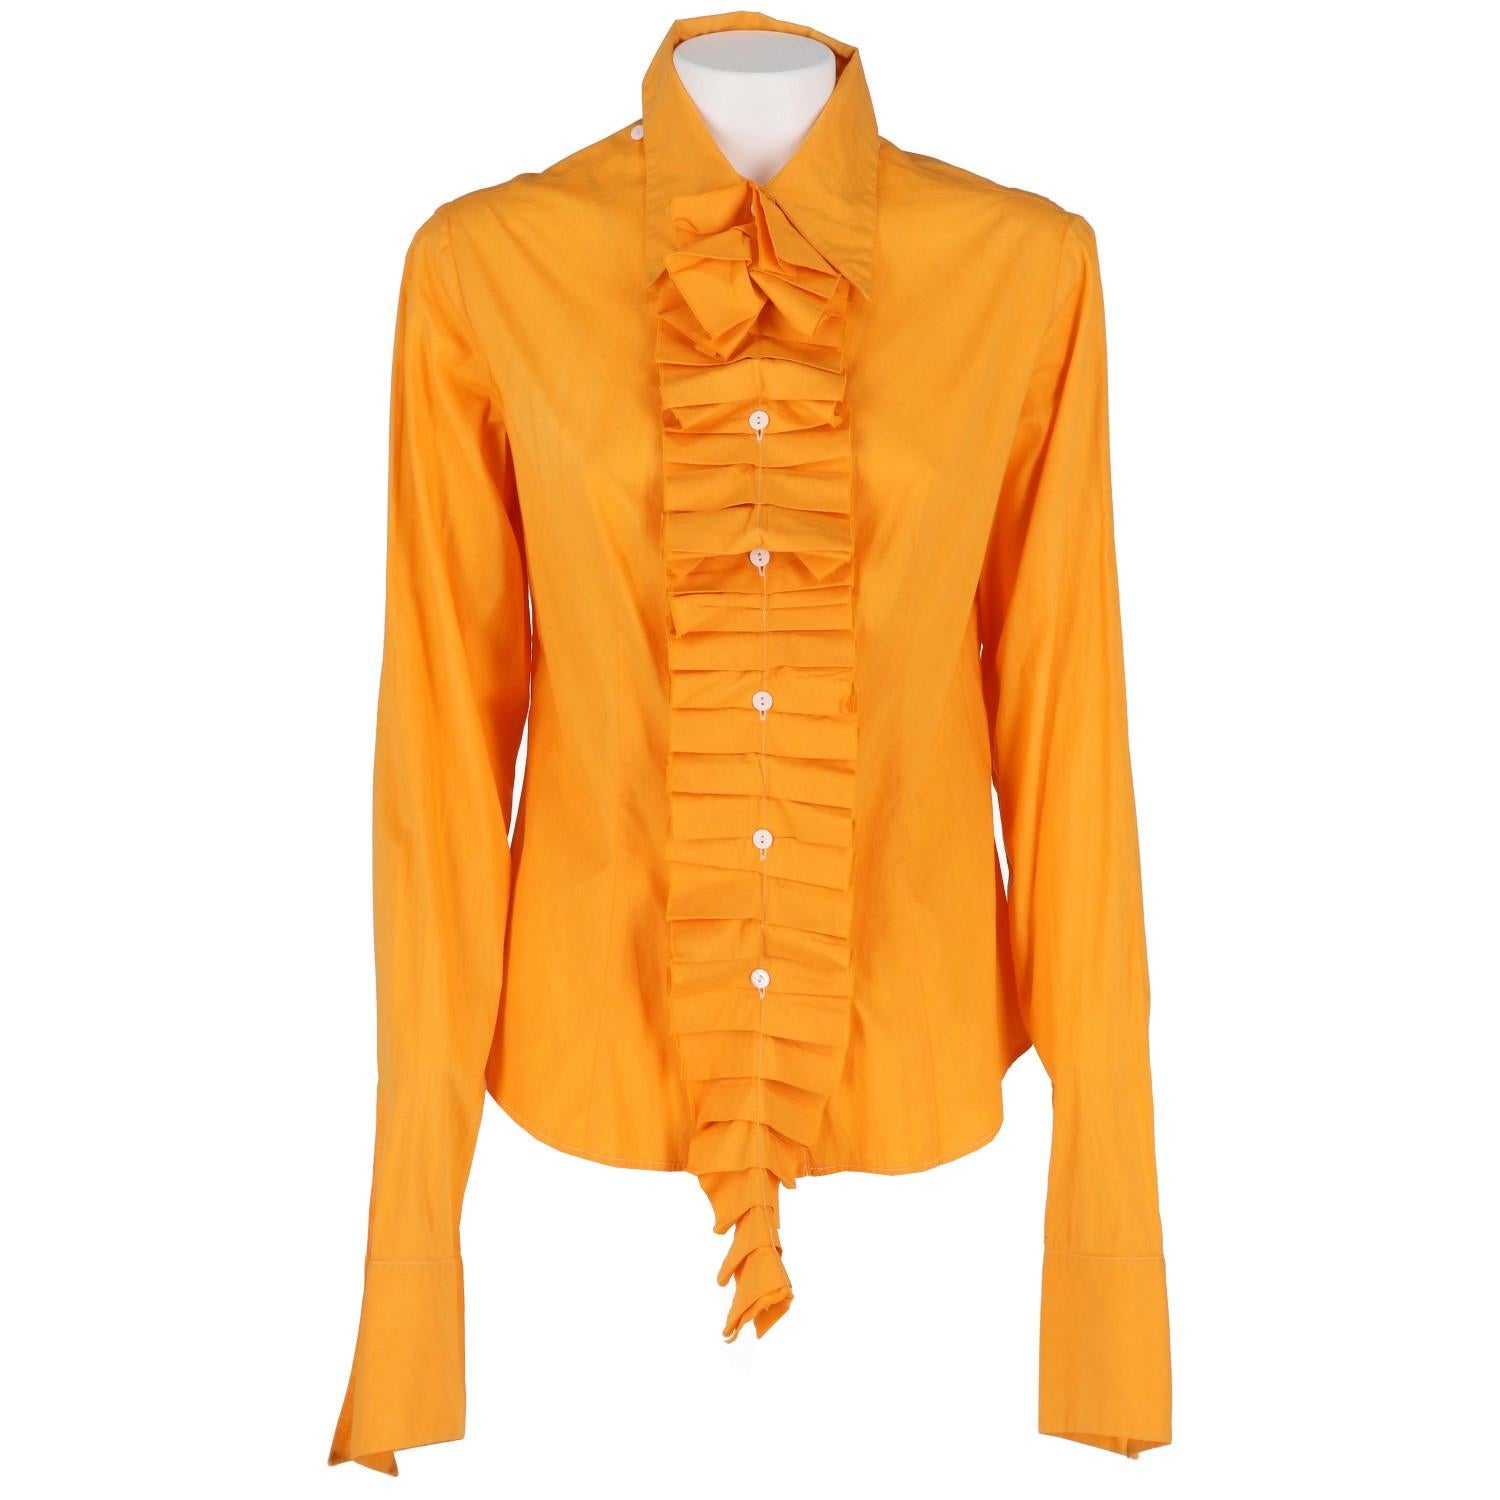 Just Cavalli orange cotton shirt. Classic pointed collar and front closure with white buttons. Removable decorative ruffles.

The product has slight halos on the tips of the collar as shown in the pictures.

Years: 2000s

Made in Italy

Size: 42